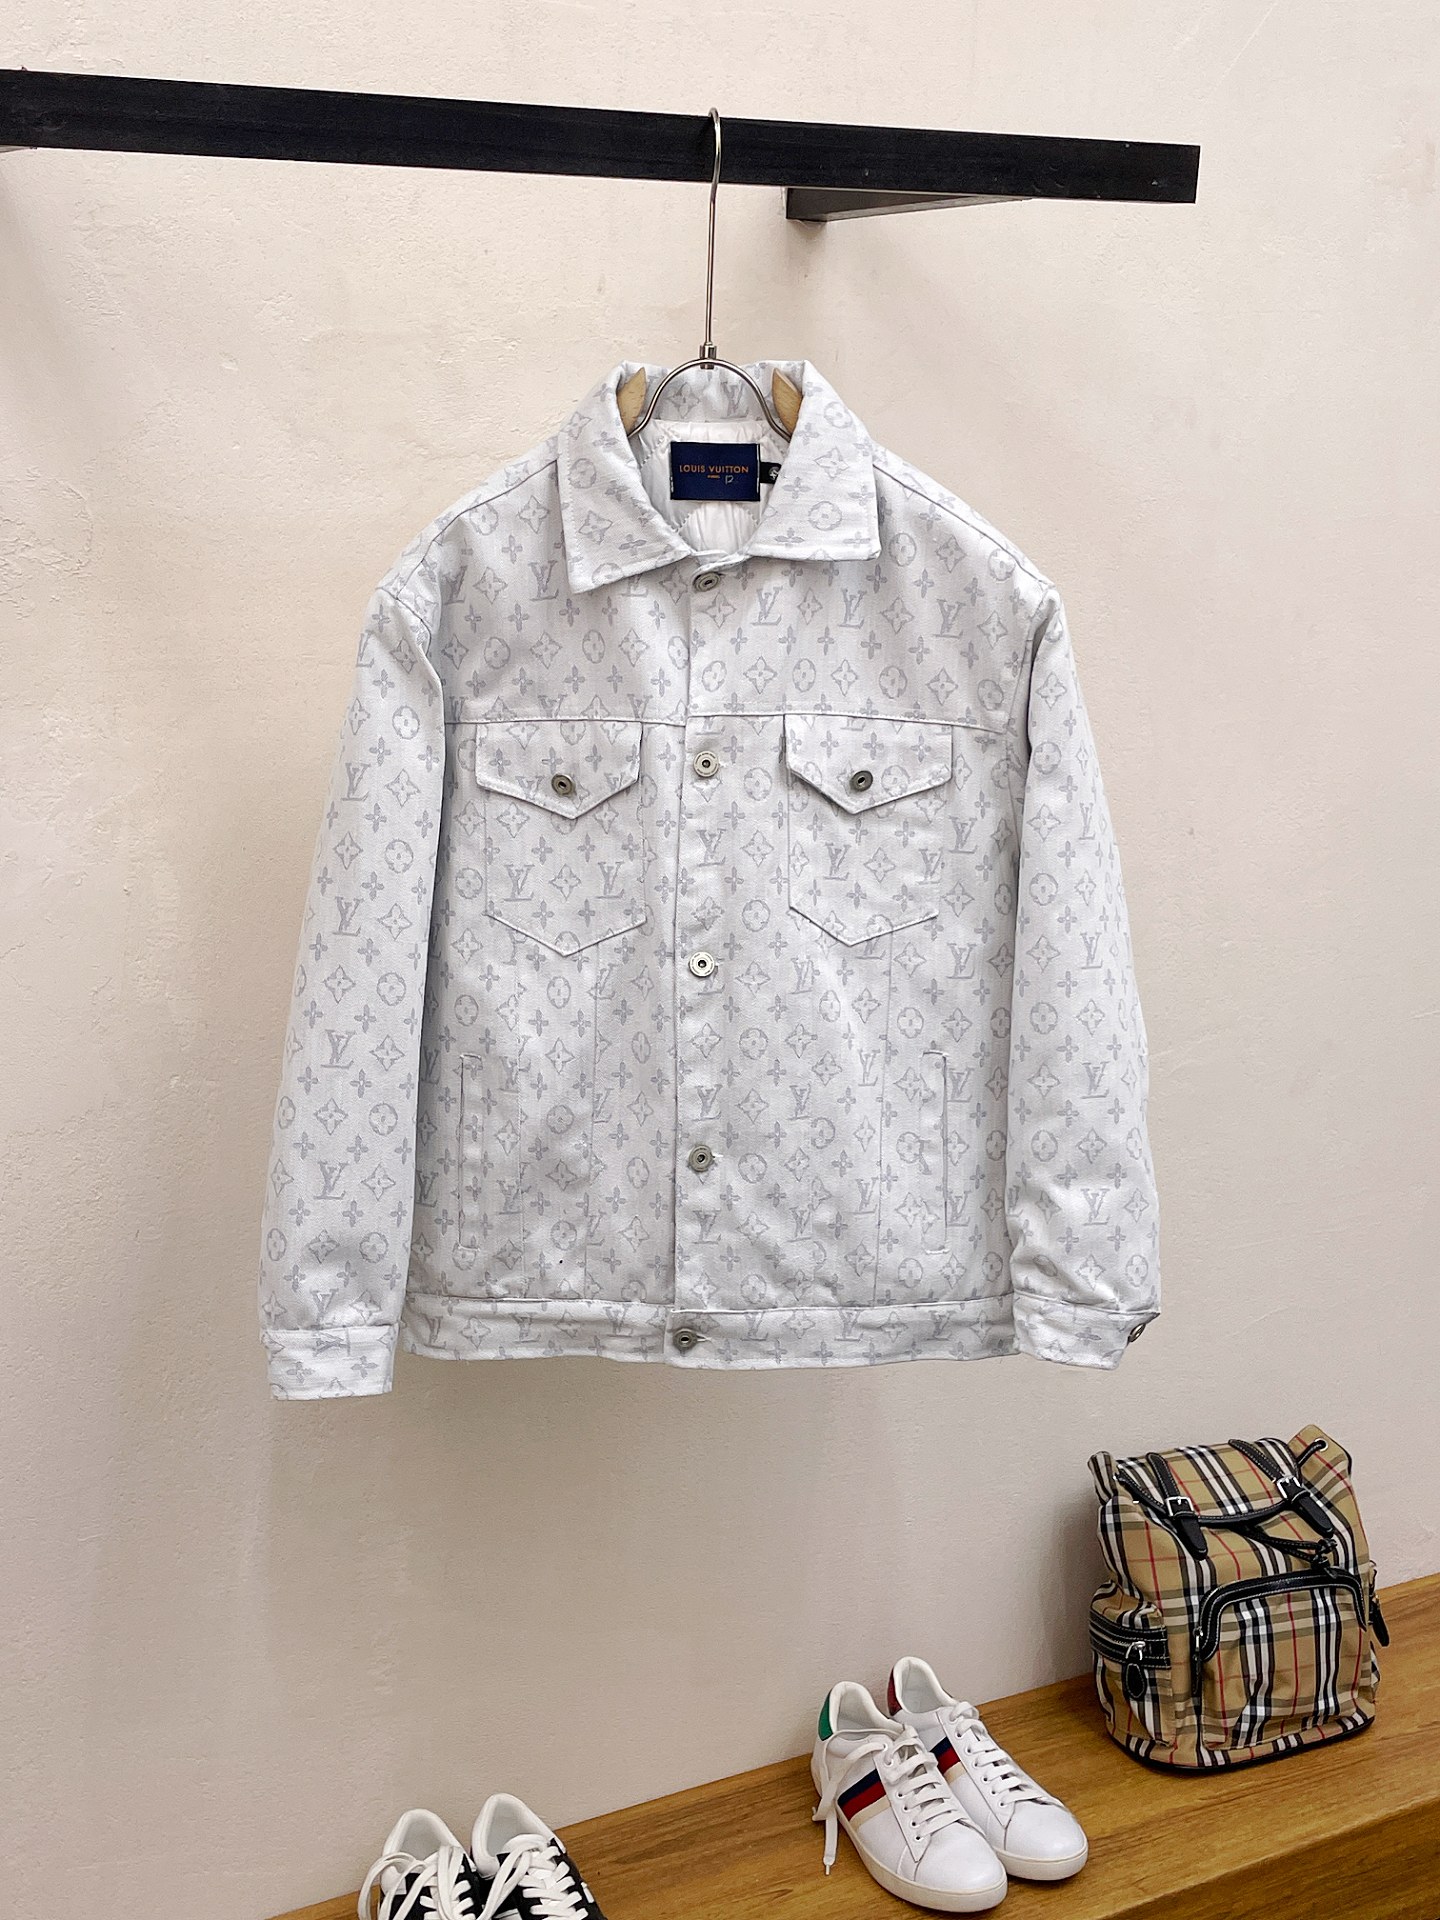 Buying Replica Louis Vuitton Clothing Coats & Jackets Cotton Down Winter Collection